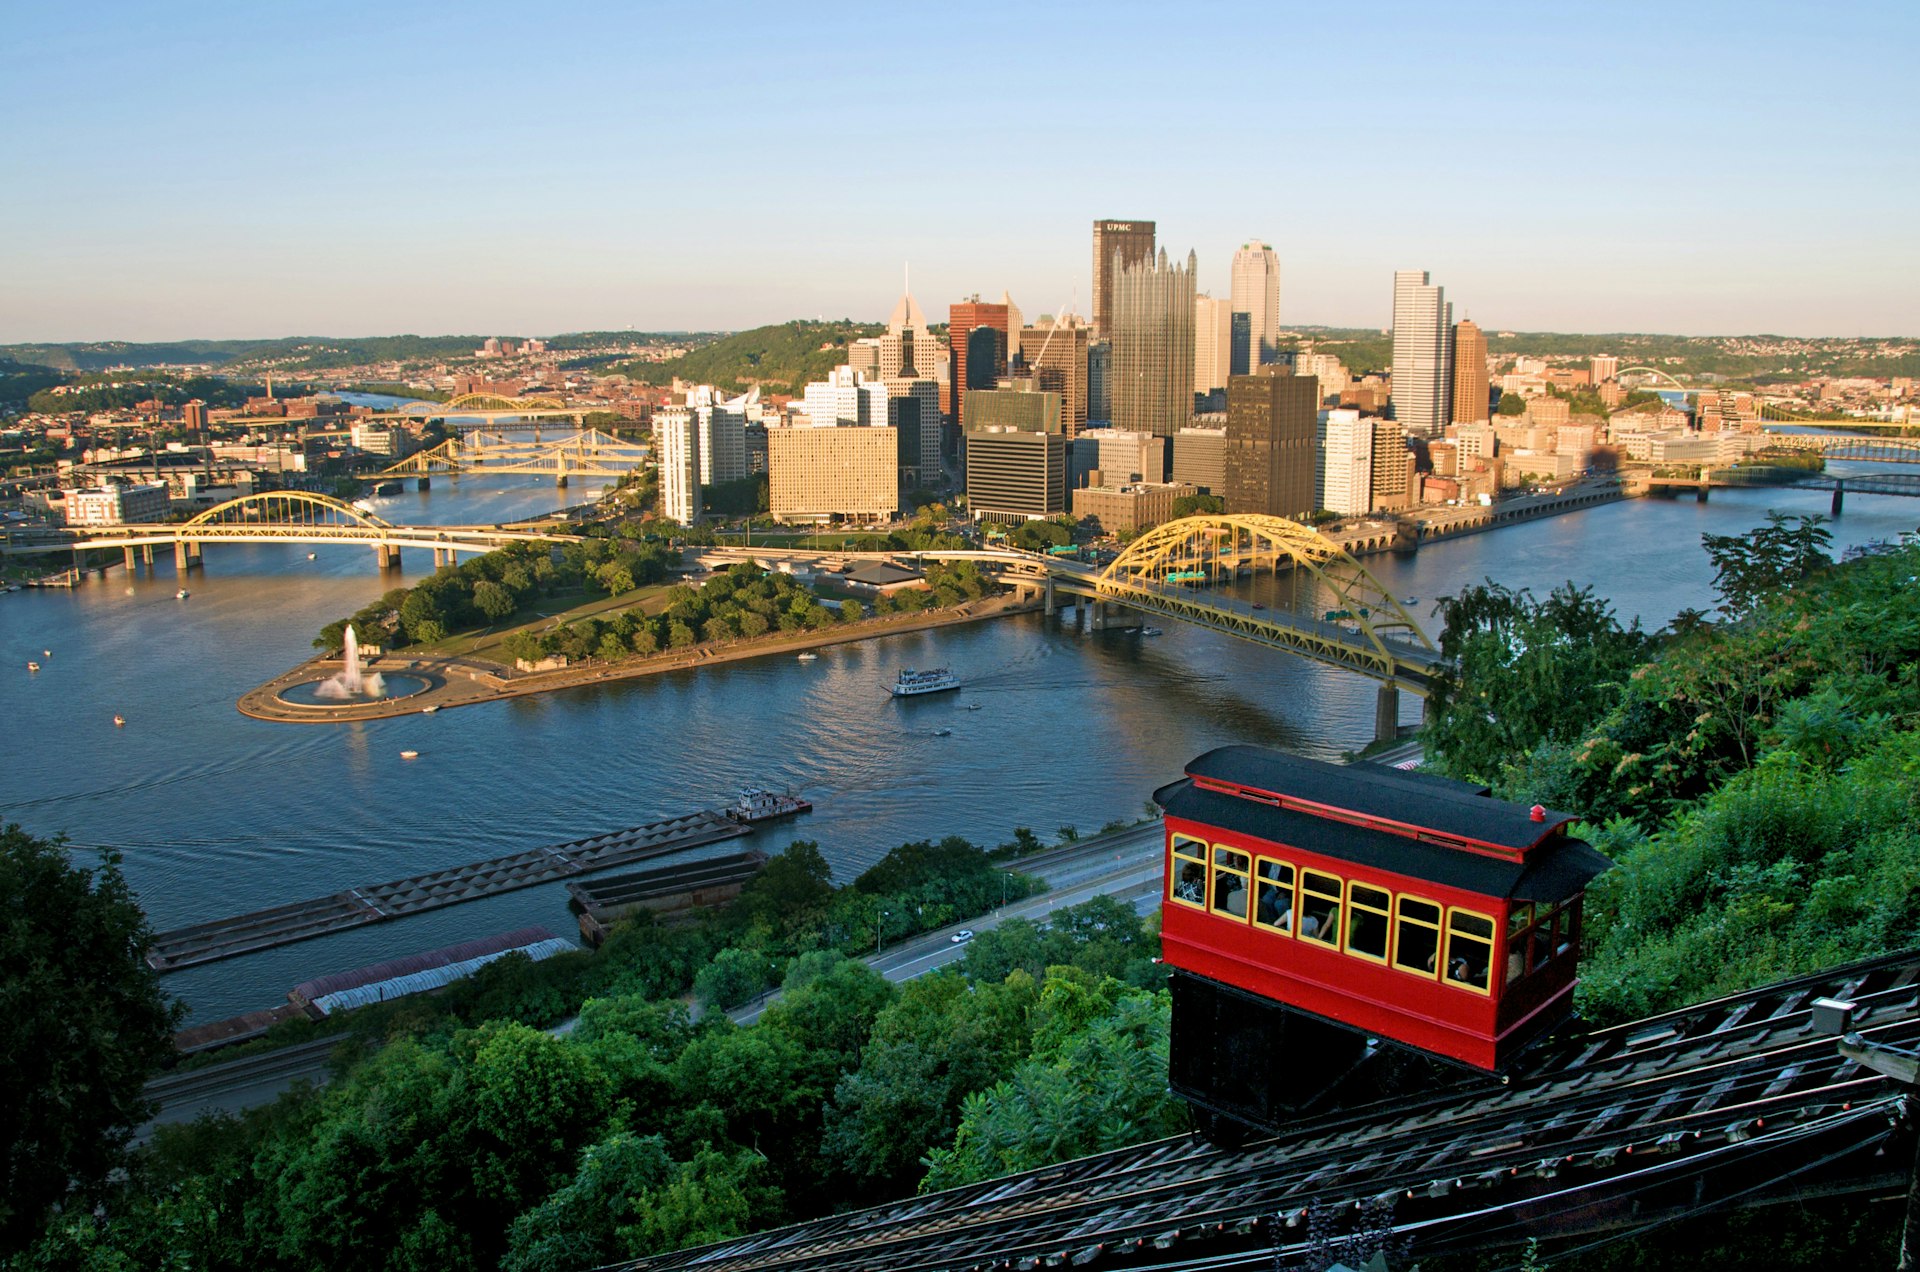 Pittsburgh skyline with a red funicular in the foreground